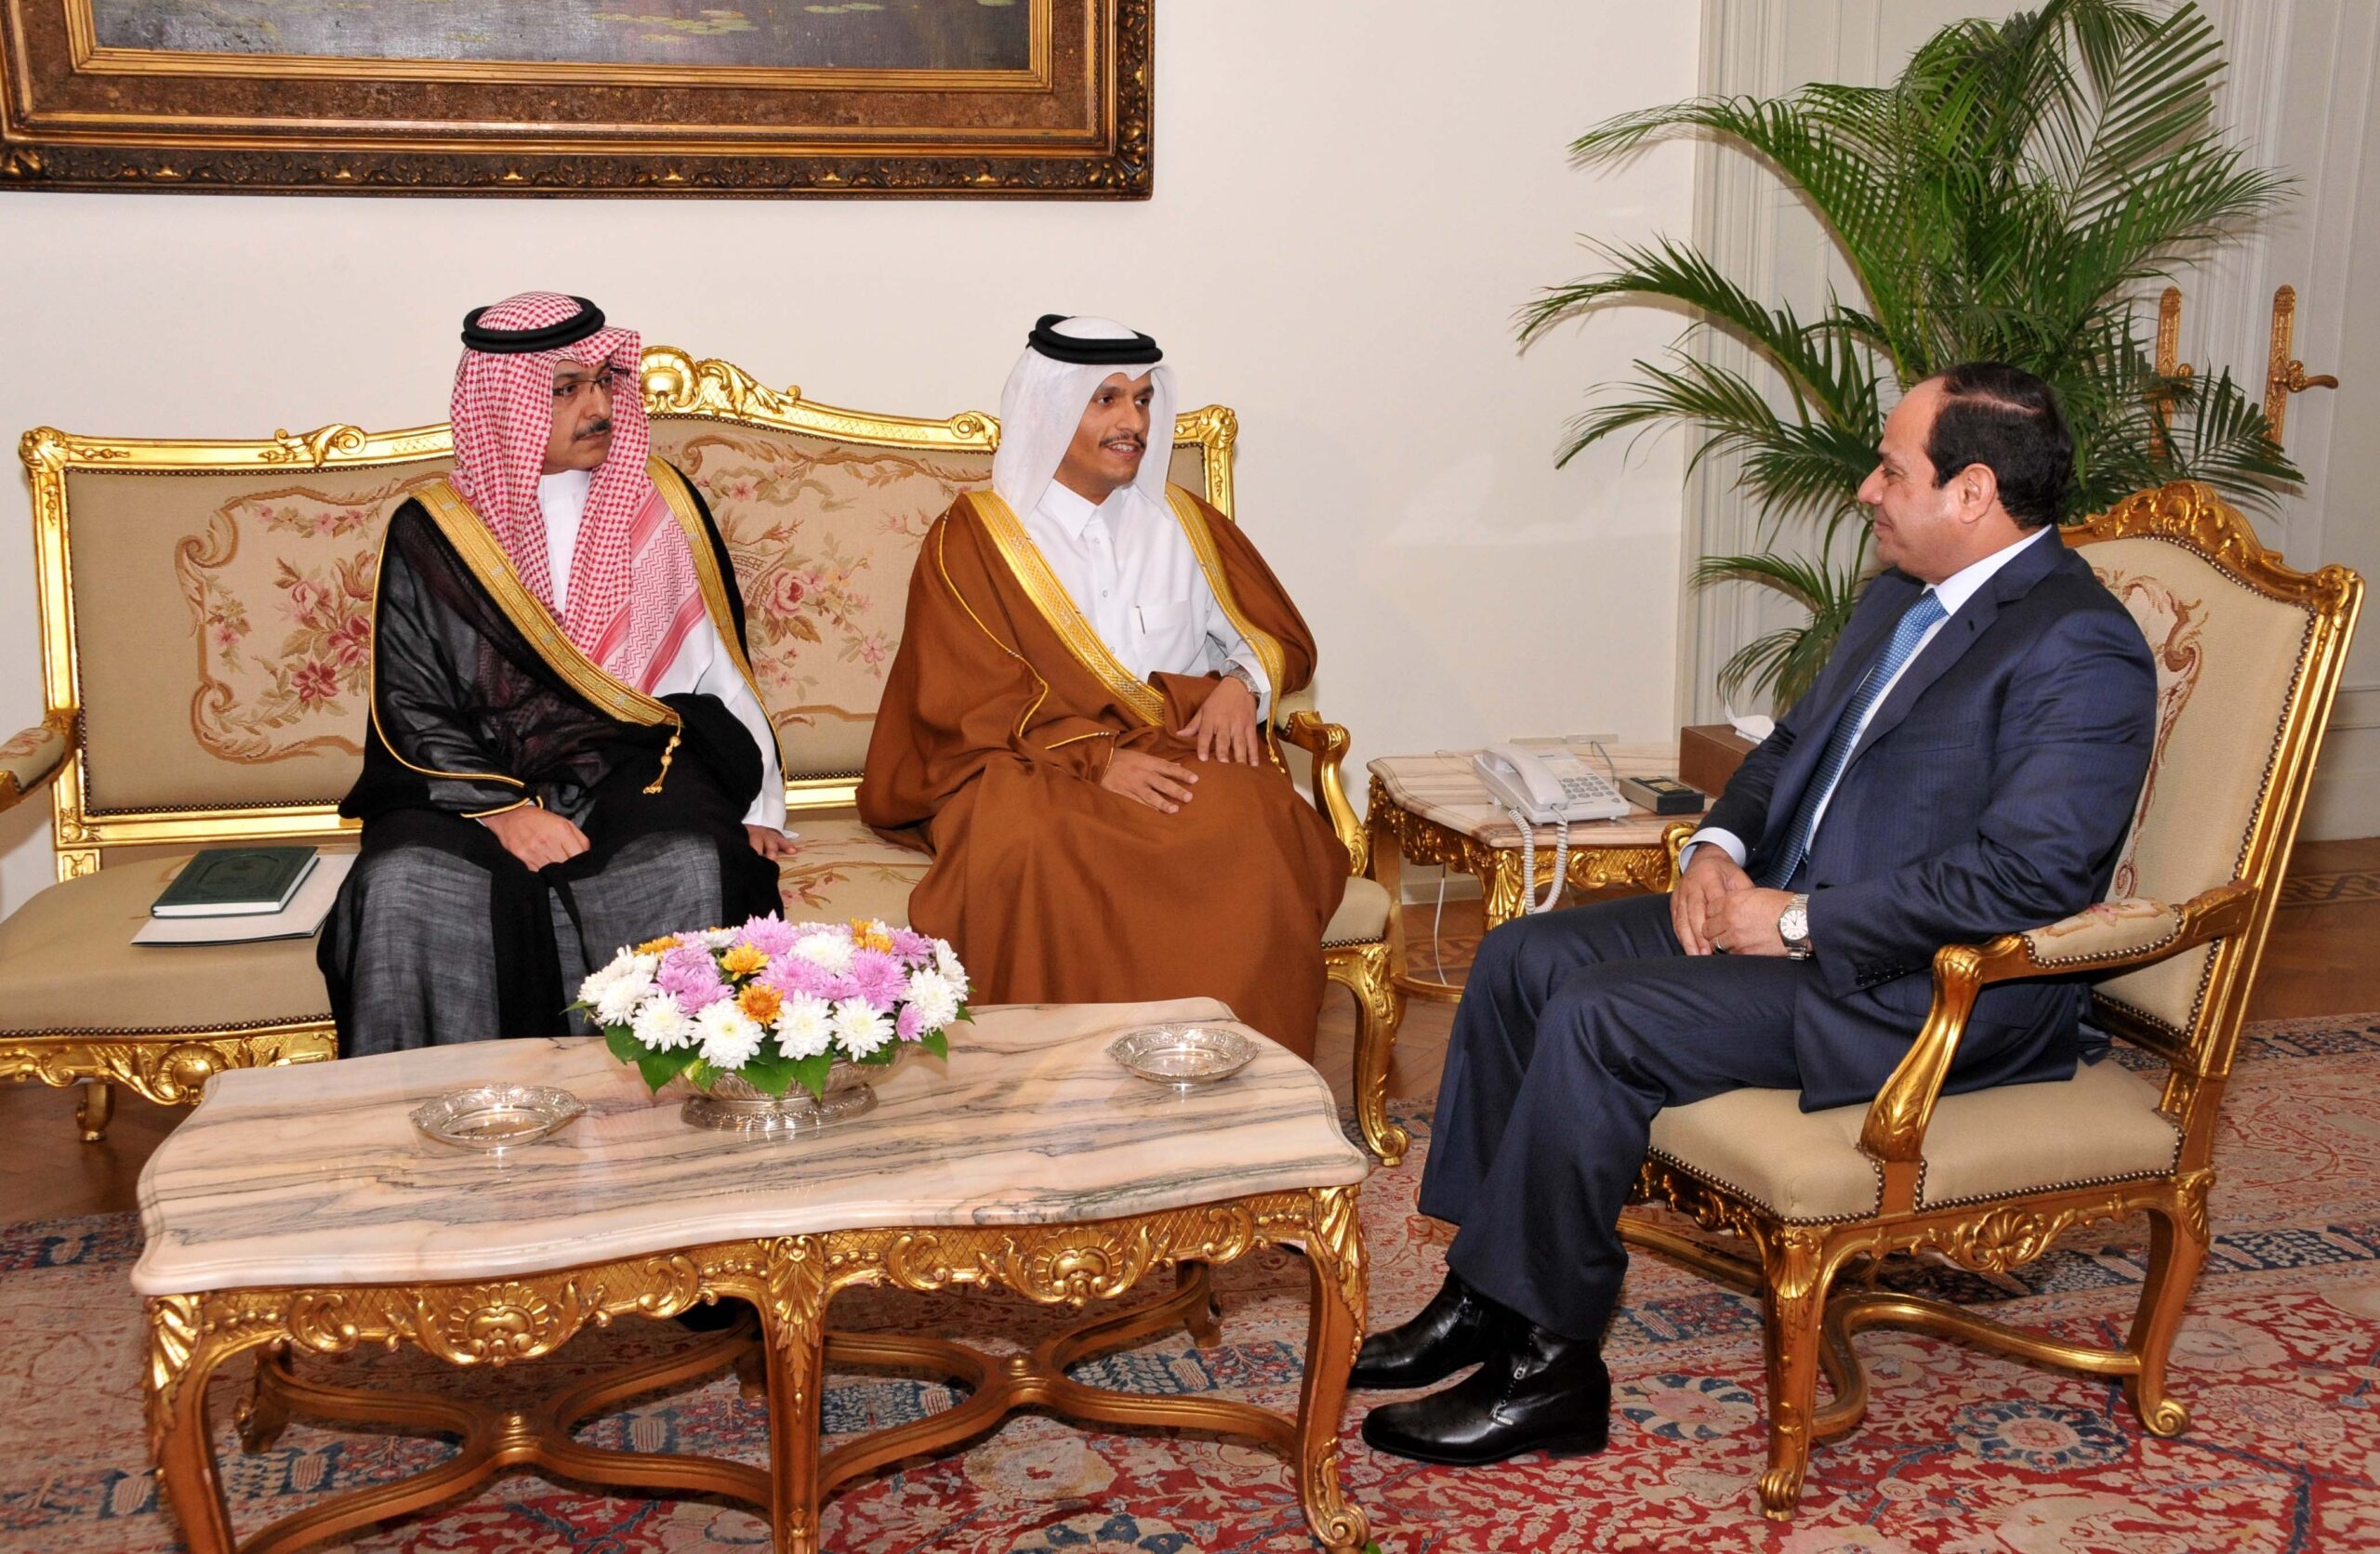 Djibouti: Al-Sisi “looks forward to overcome conflicts with Qatar”